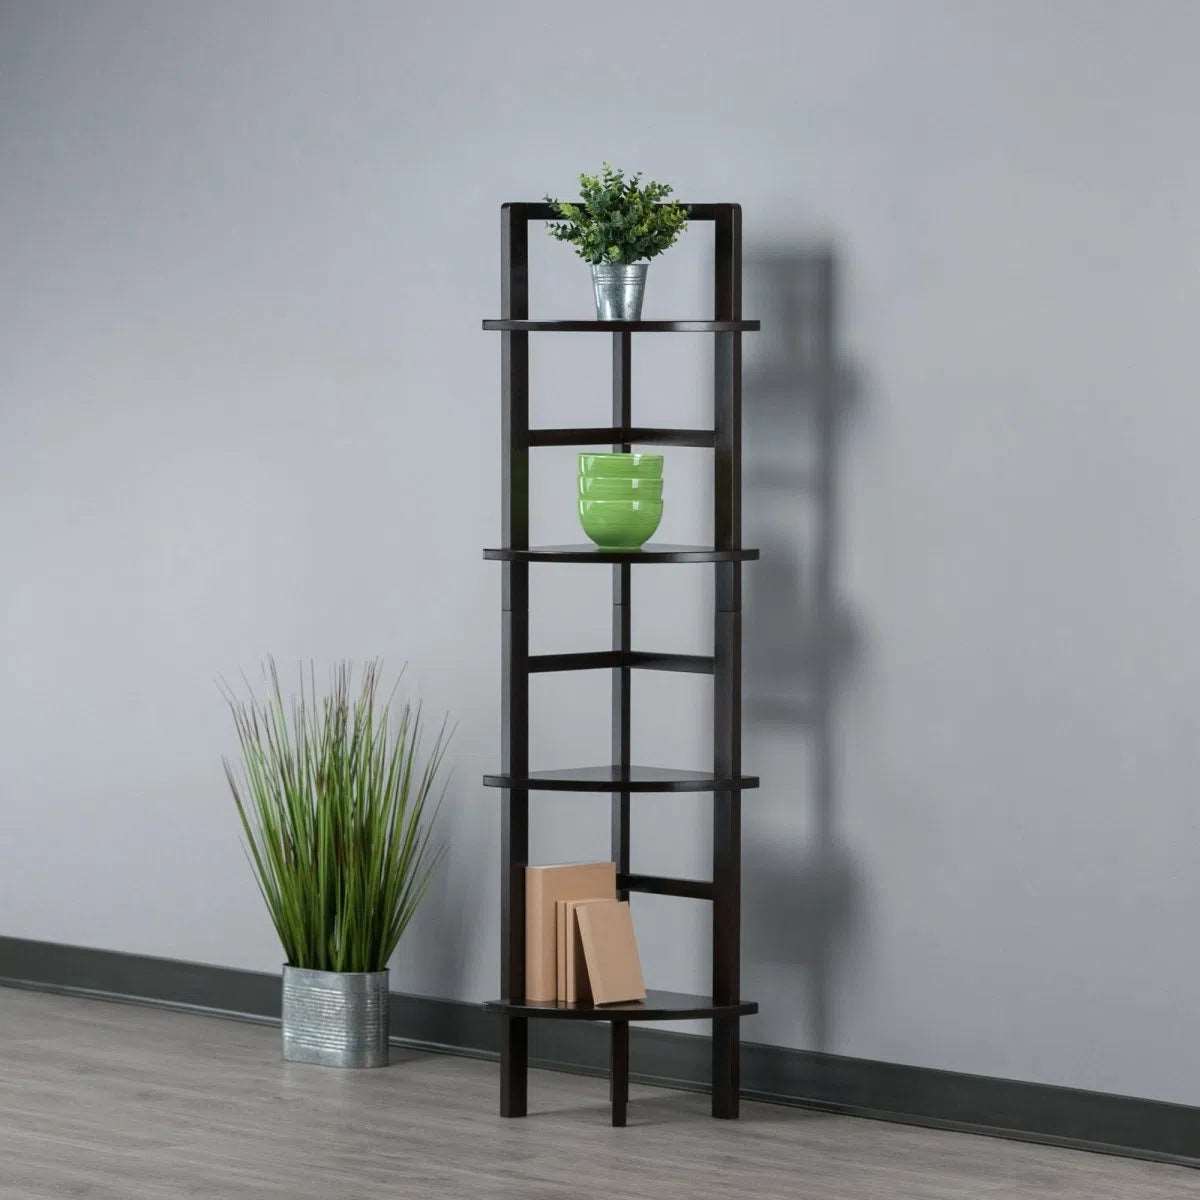 Aiden Corner Bakers Rack in Coffee Finish Home Decor by Design